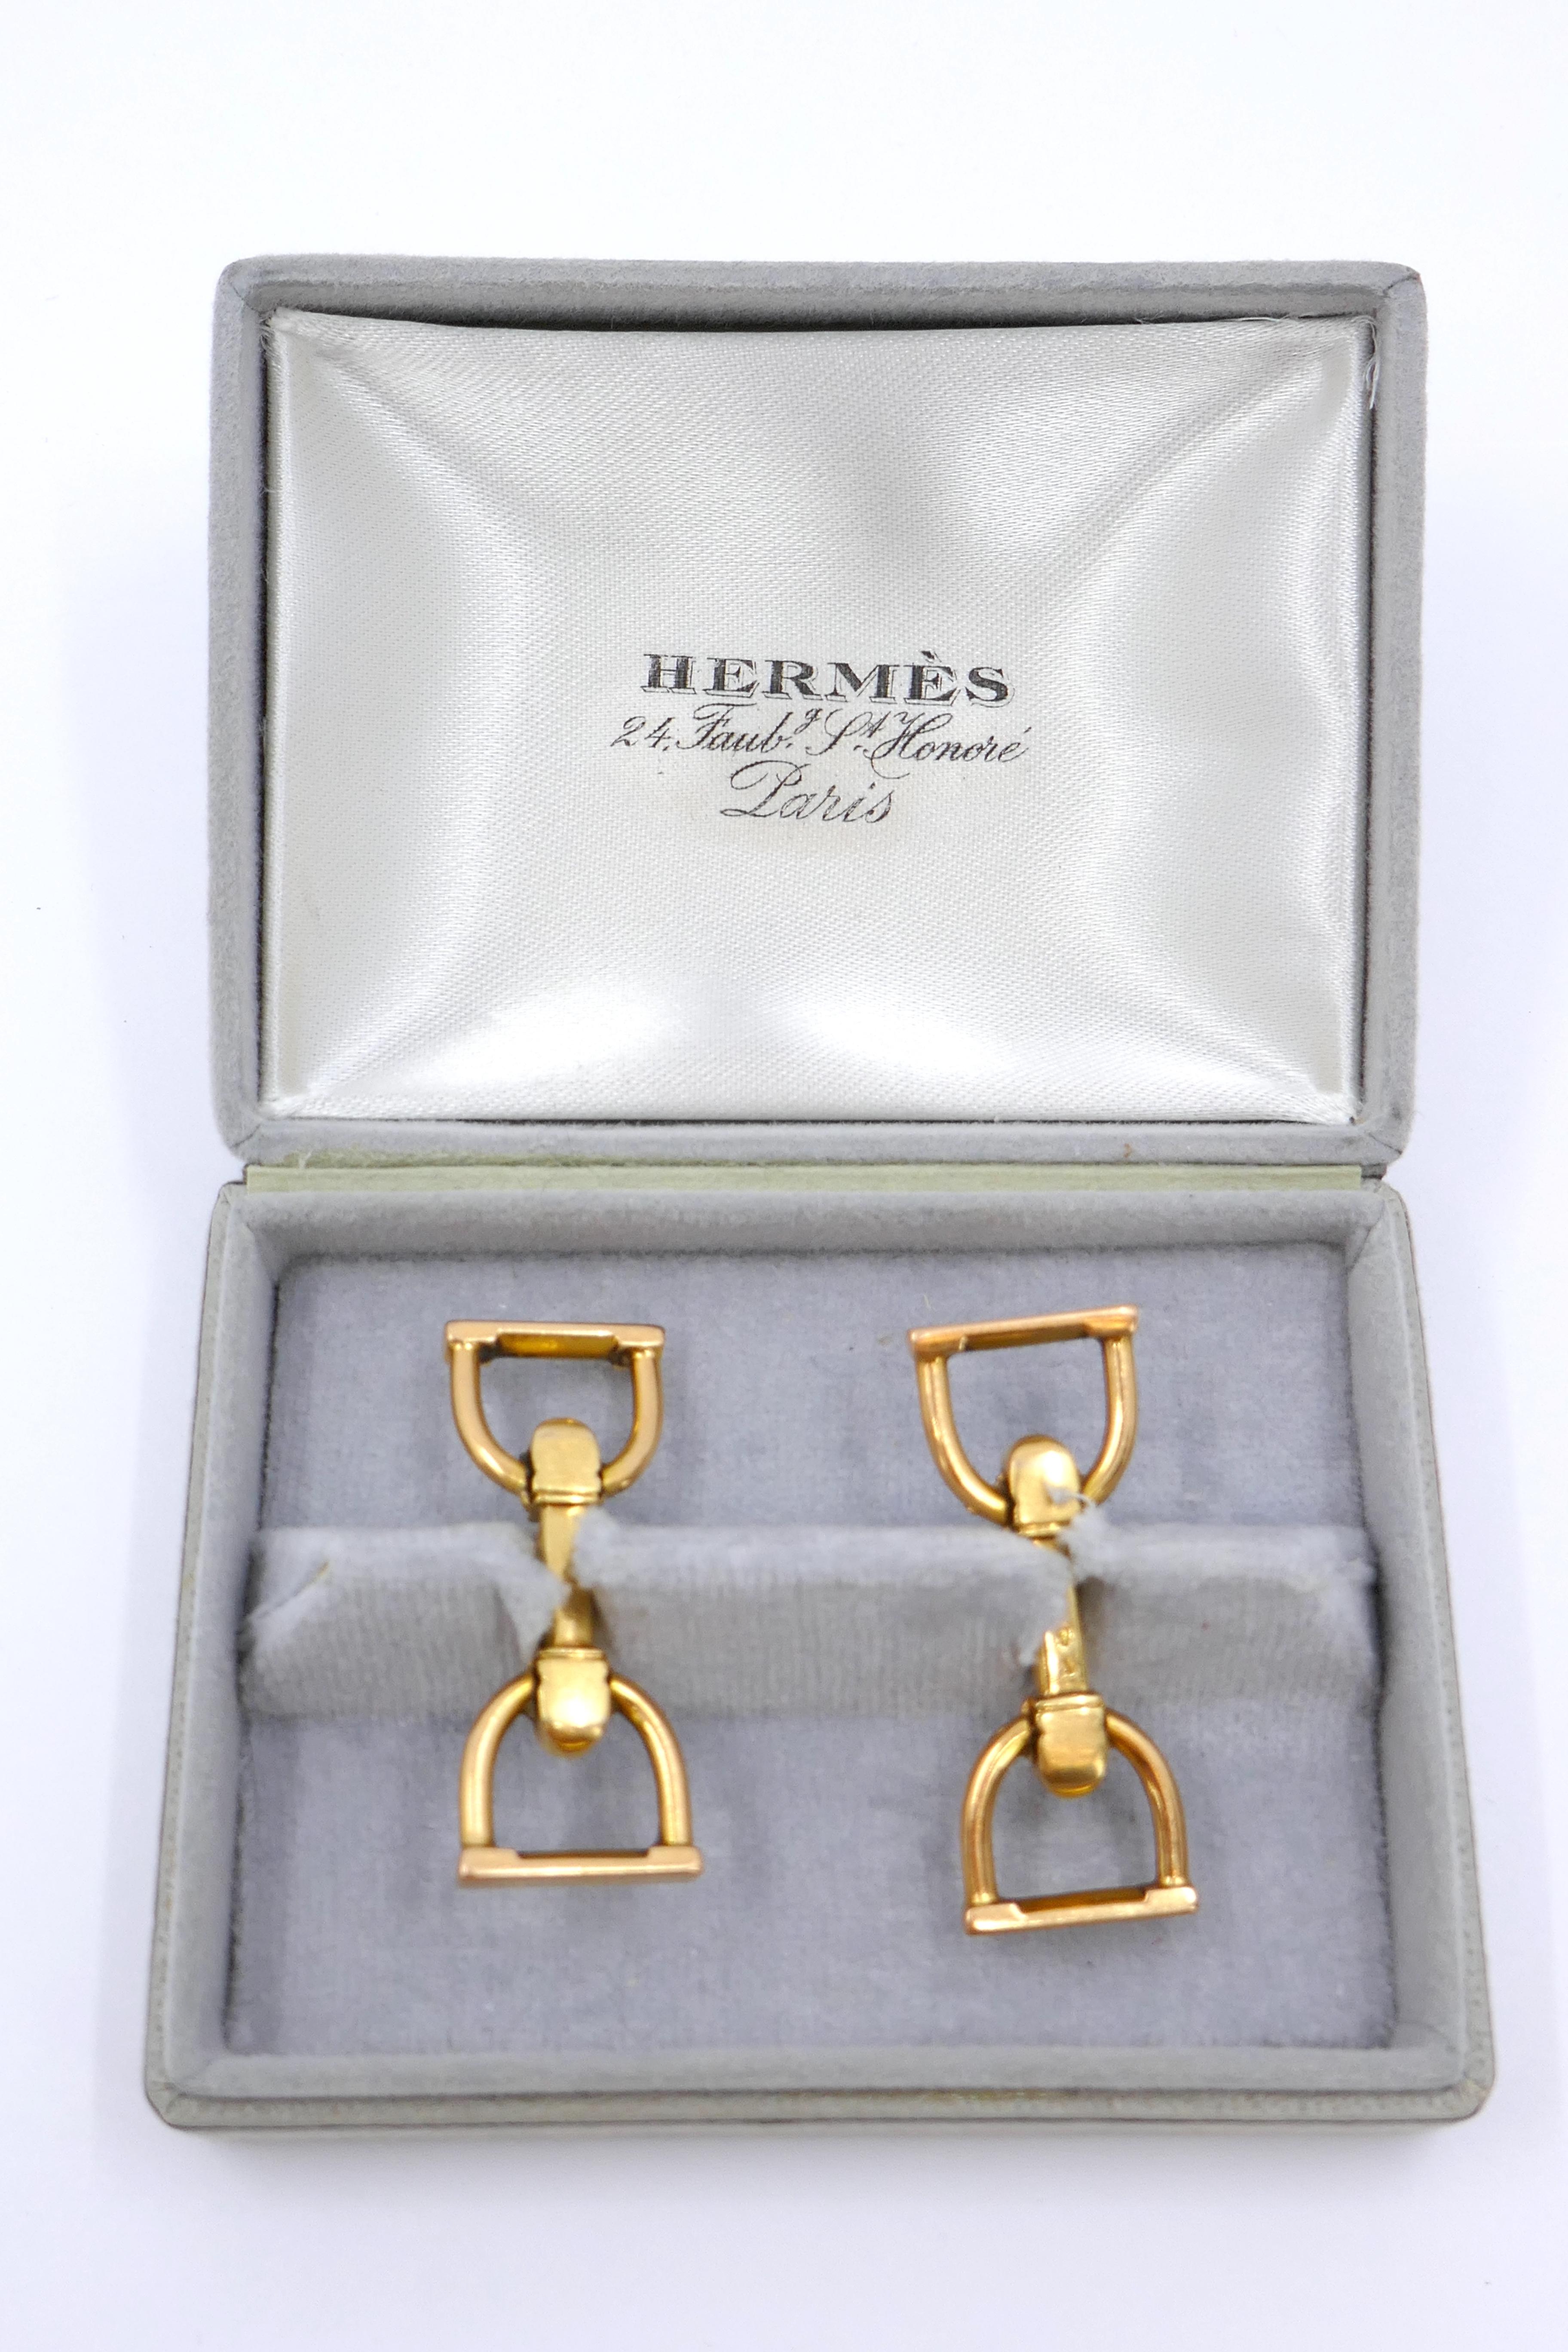 Immerse yourself in the heritage of Hermès with these stunning Vintage Equestrian Motif cuff links in 18K Gold. Created in the 1960s in the heart of Paris, they echo the brand's roots, which date back to 1837 when it was founded as a harness